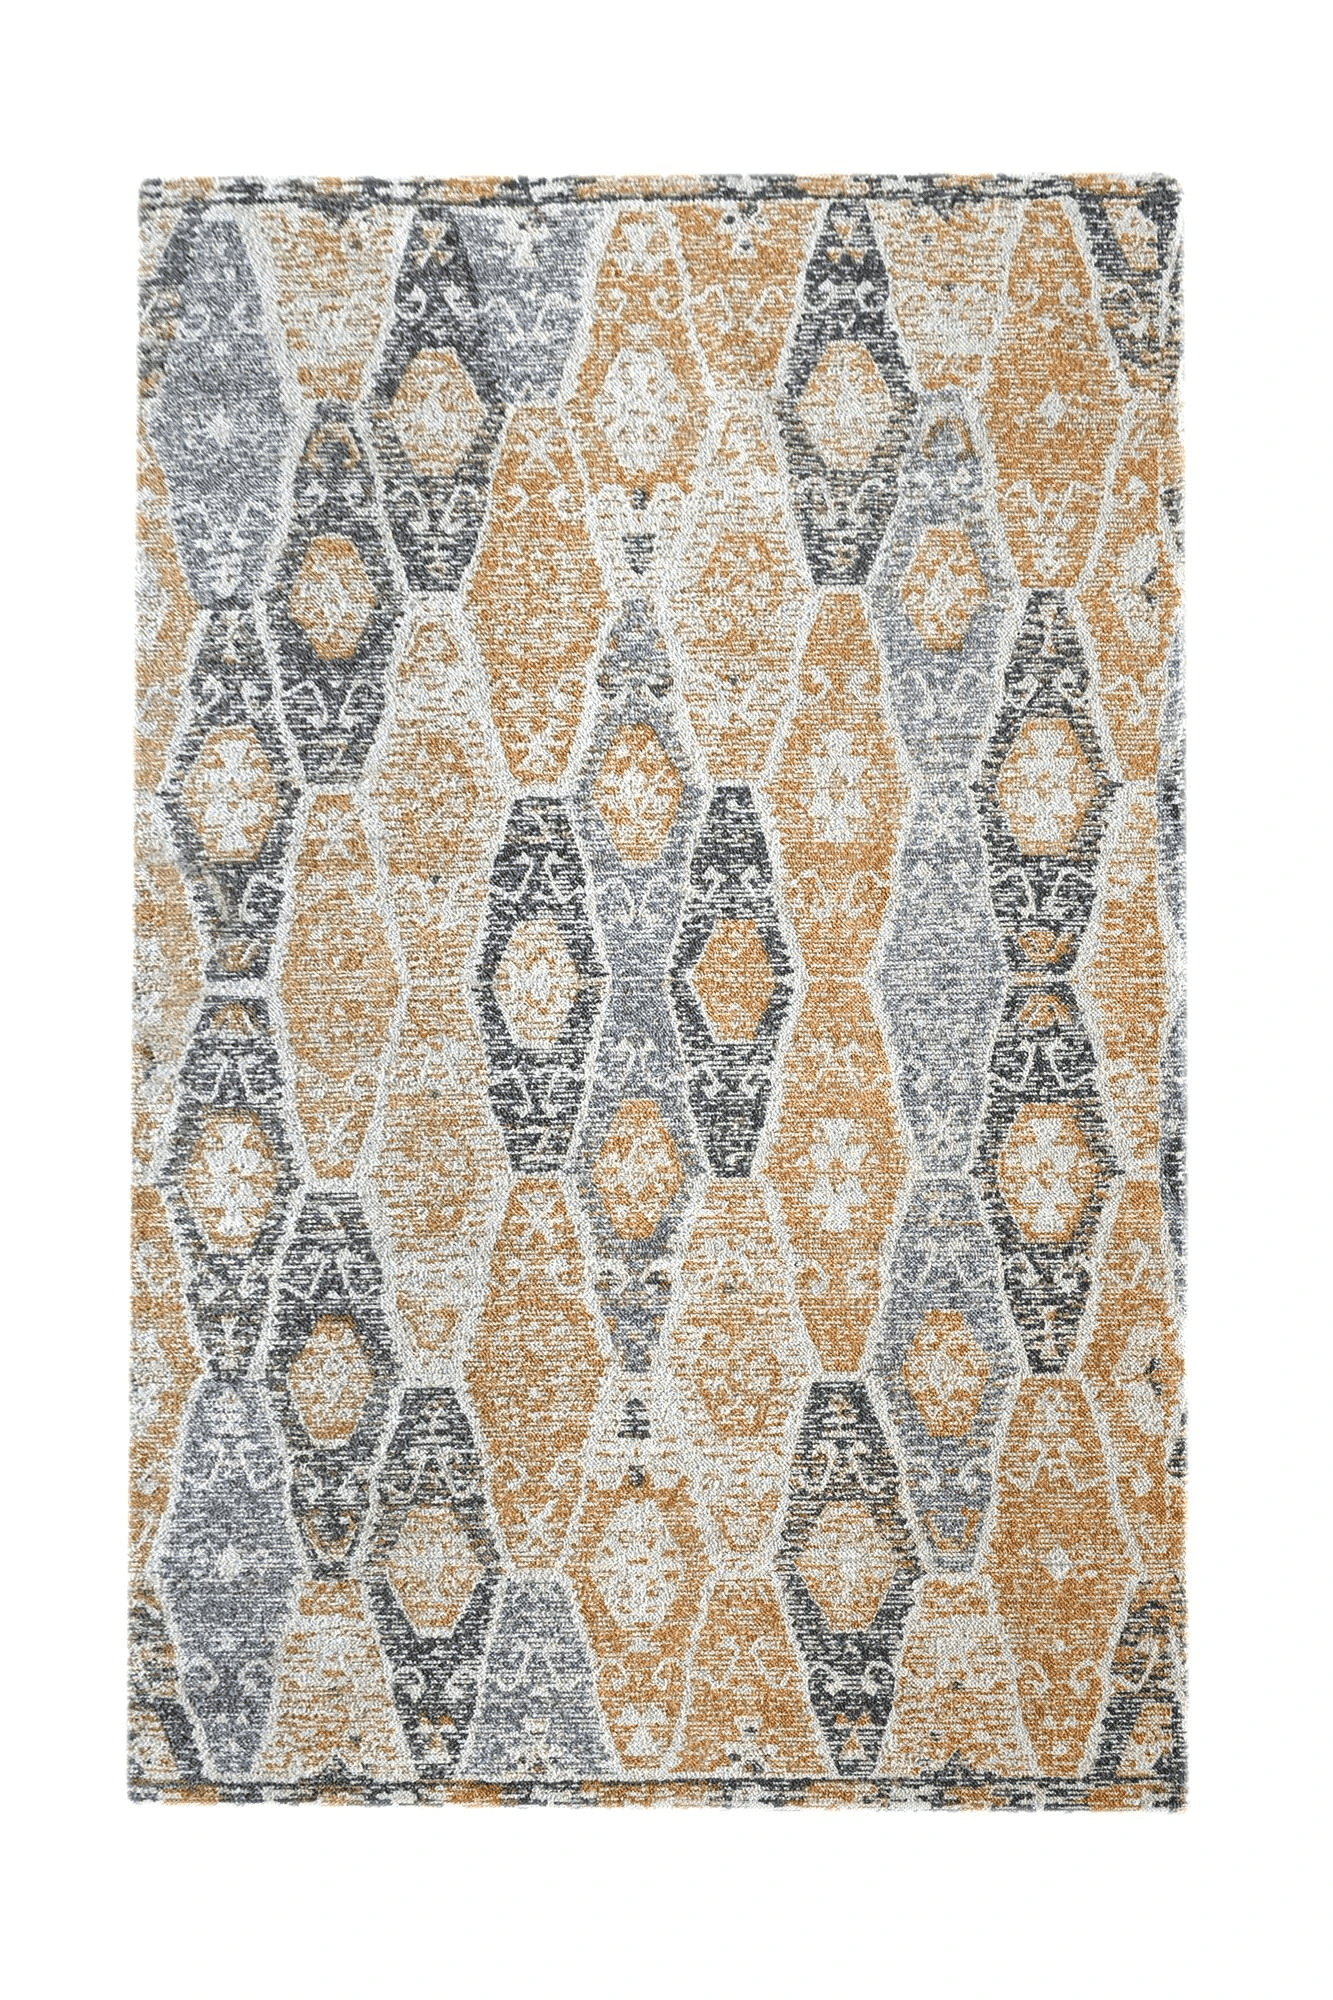 Kyushu Cotton Rug-Furnishings-RECYCLED COTTON & COTTON RUGS, Rugs-Forest Homes-Nature inspired decor-Nature decor